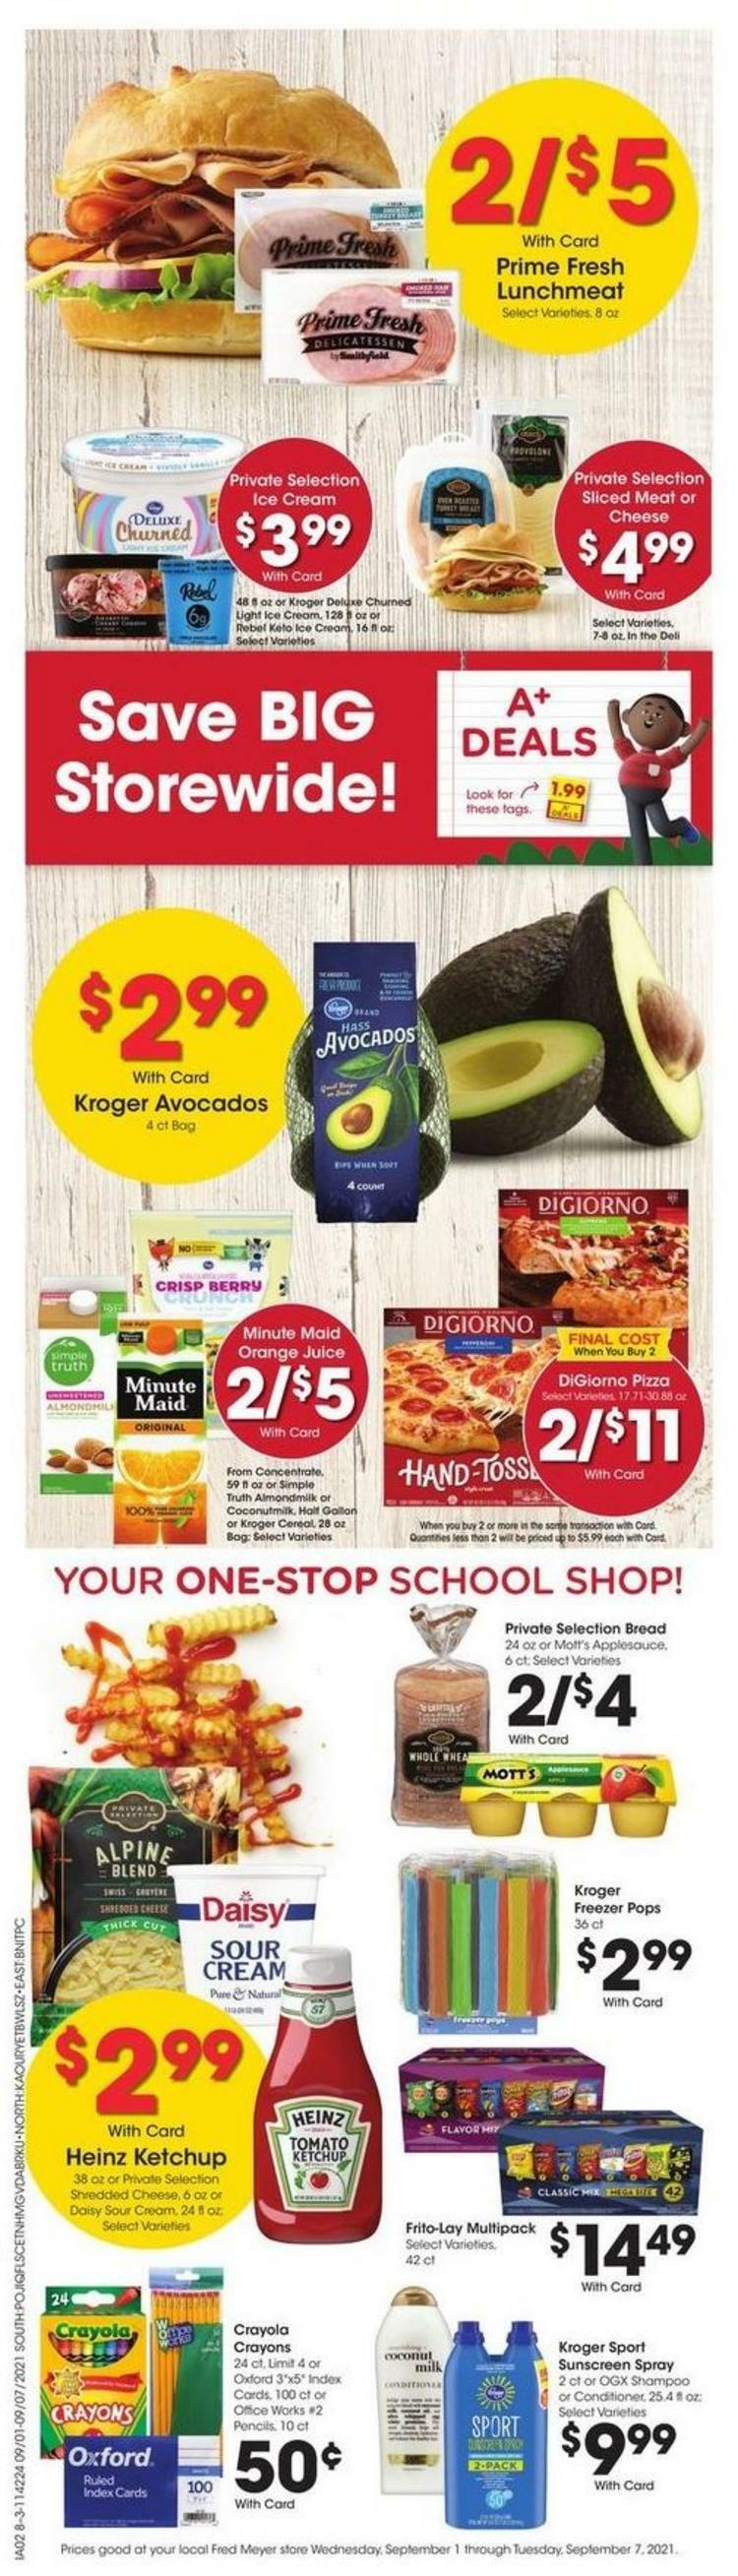 Fred Meyer Weekly Ad from September 1